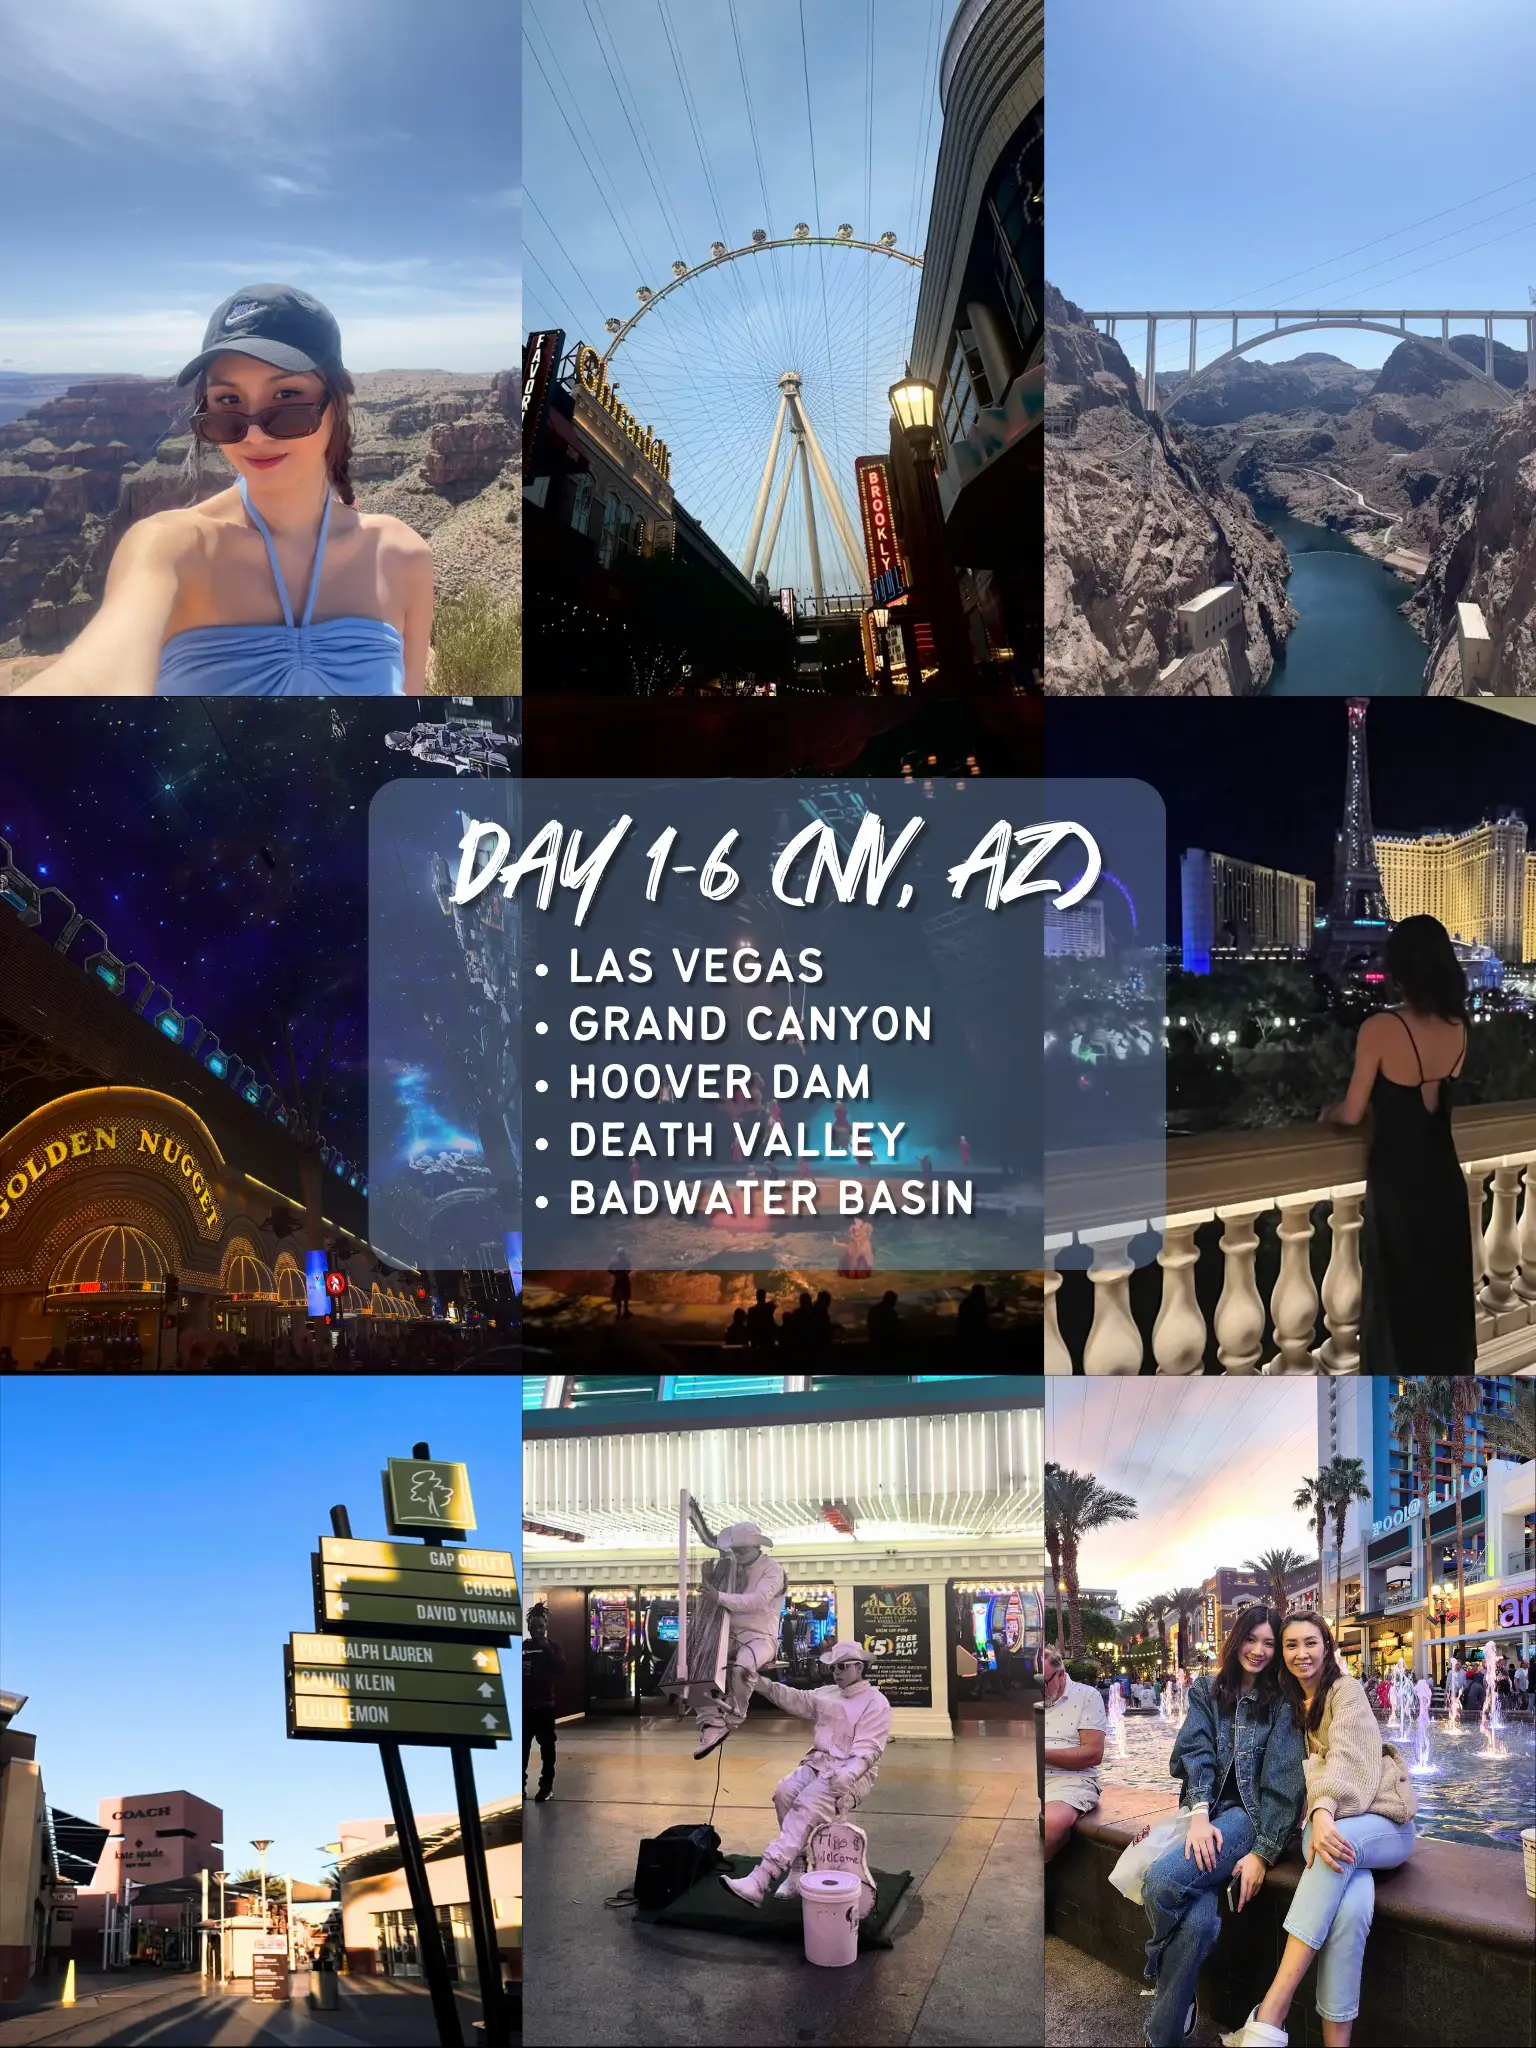 11 Cities, 3 States In 18 Days | 🇺🇸 FULL Itinerary 's images(1)